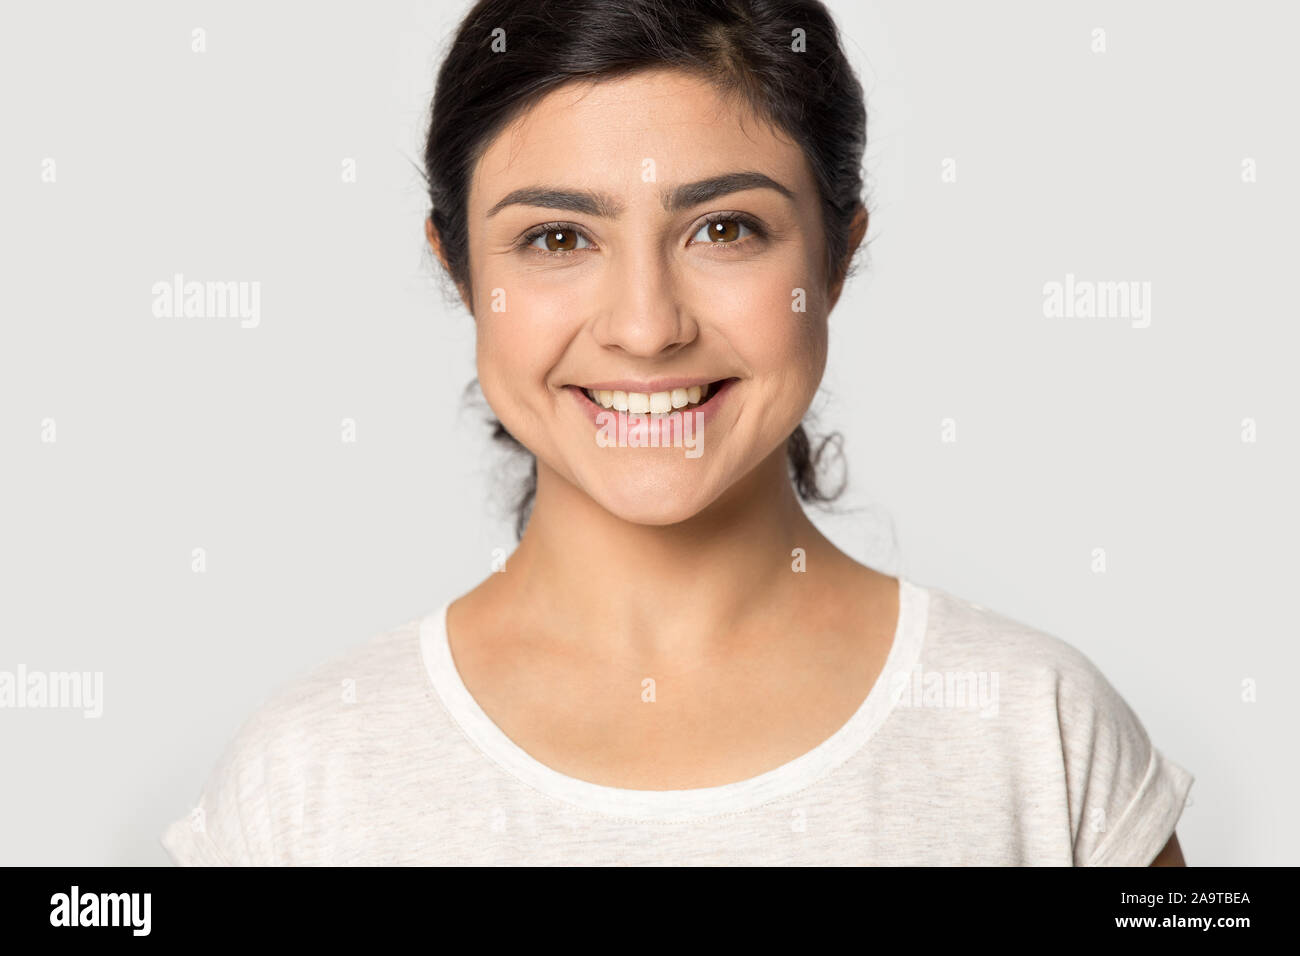 Head shot portrait beautiful Indian girl with healthy smile Stock Photo